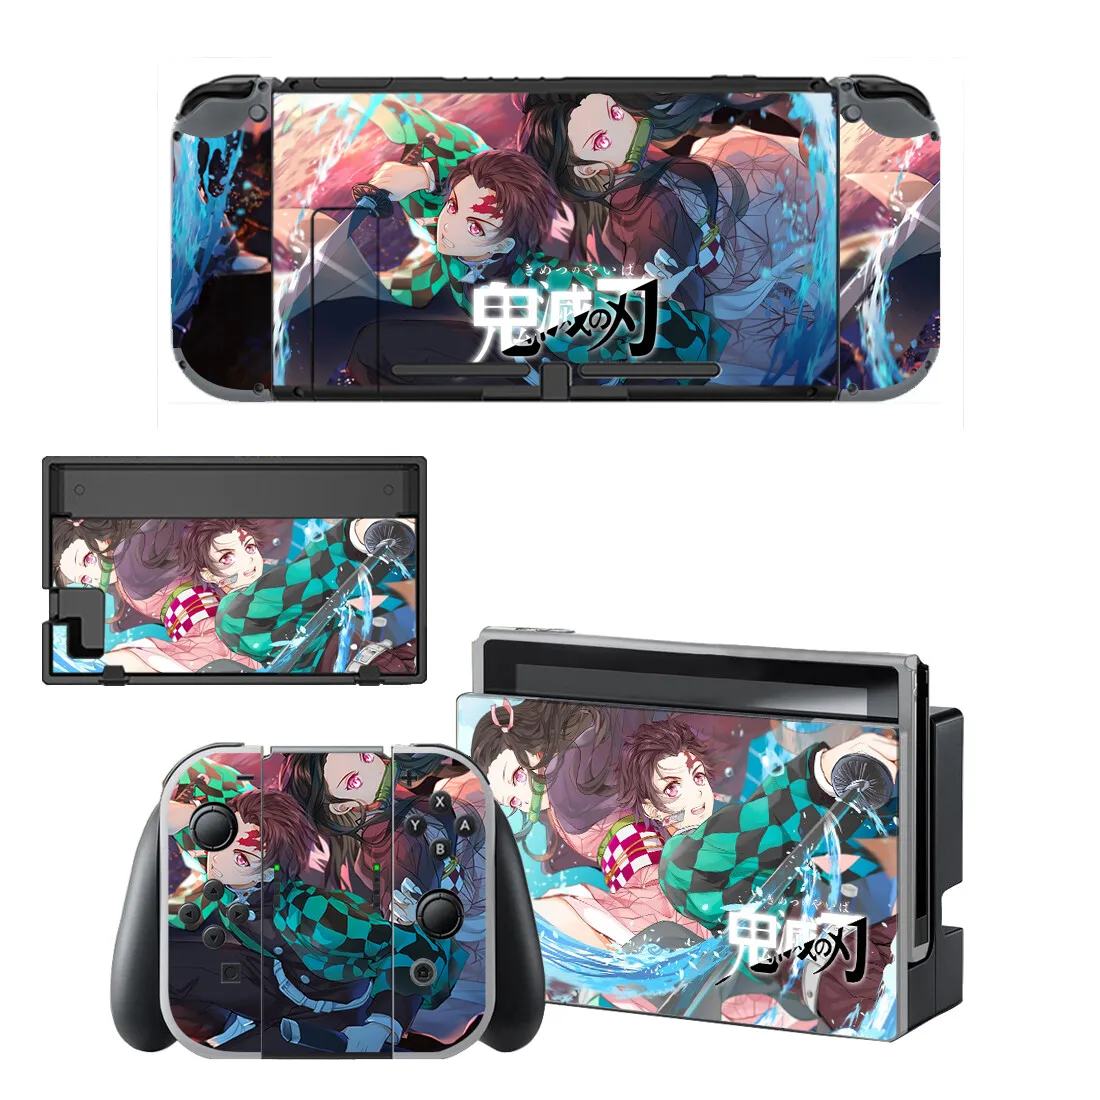 Demon Slayer Screen Protector Sticker Skin for Nintendo Switch NS Console Dock Charger Stand Holder Joycon Controller Skin images - 6